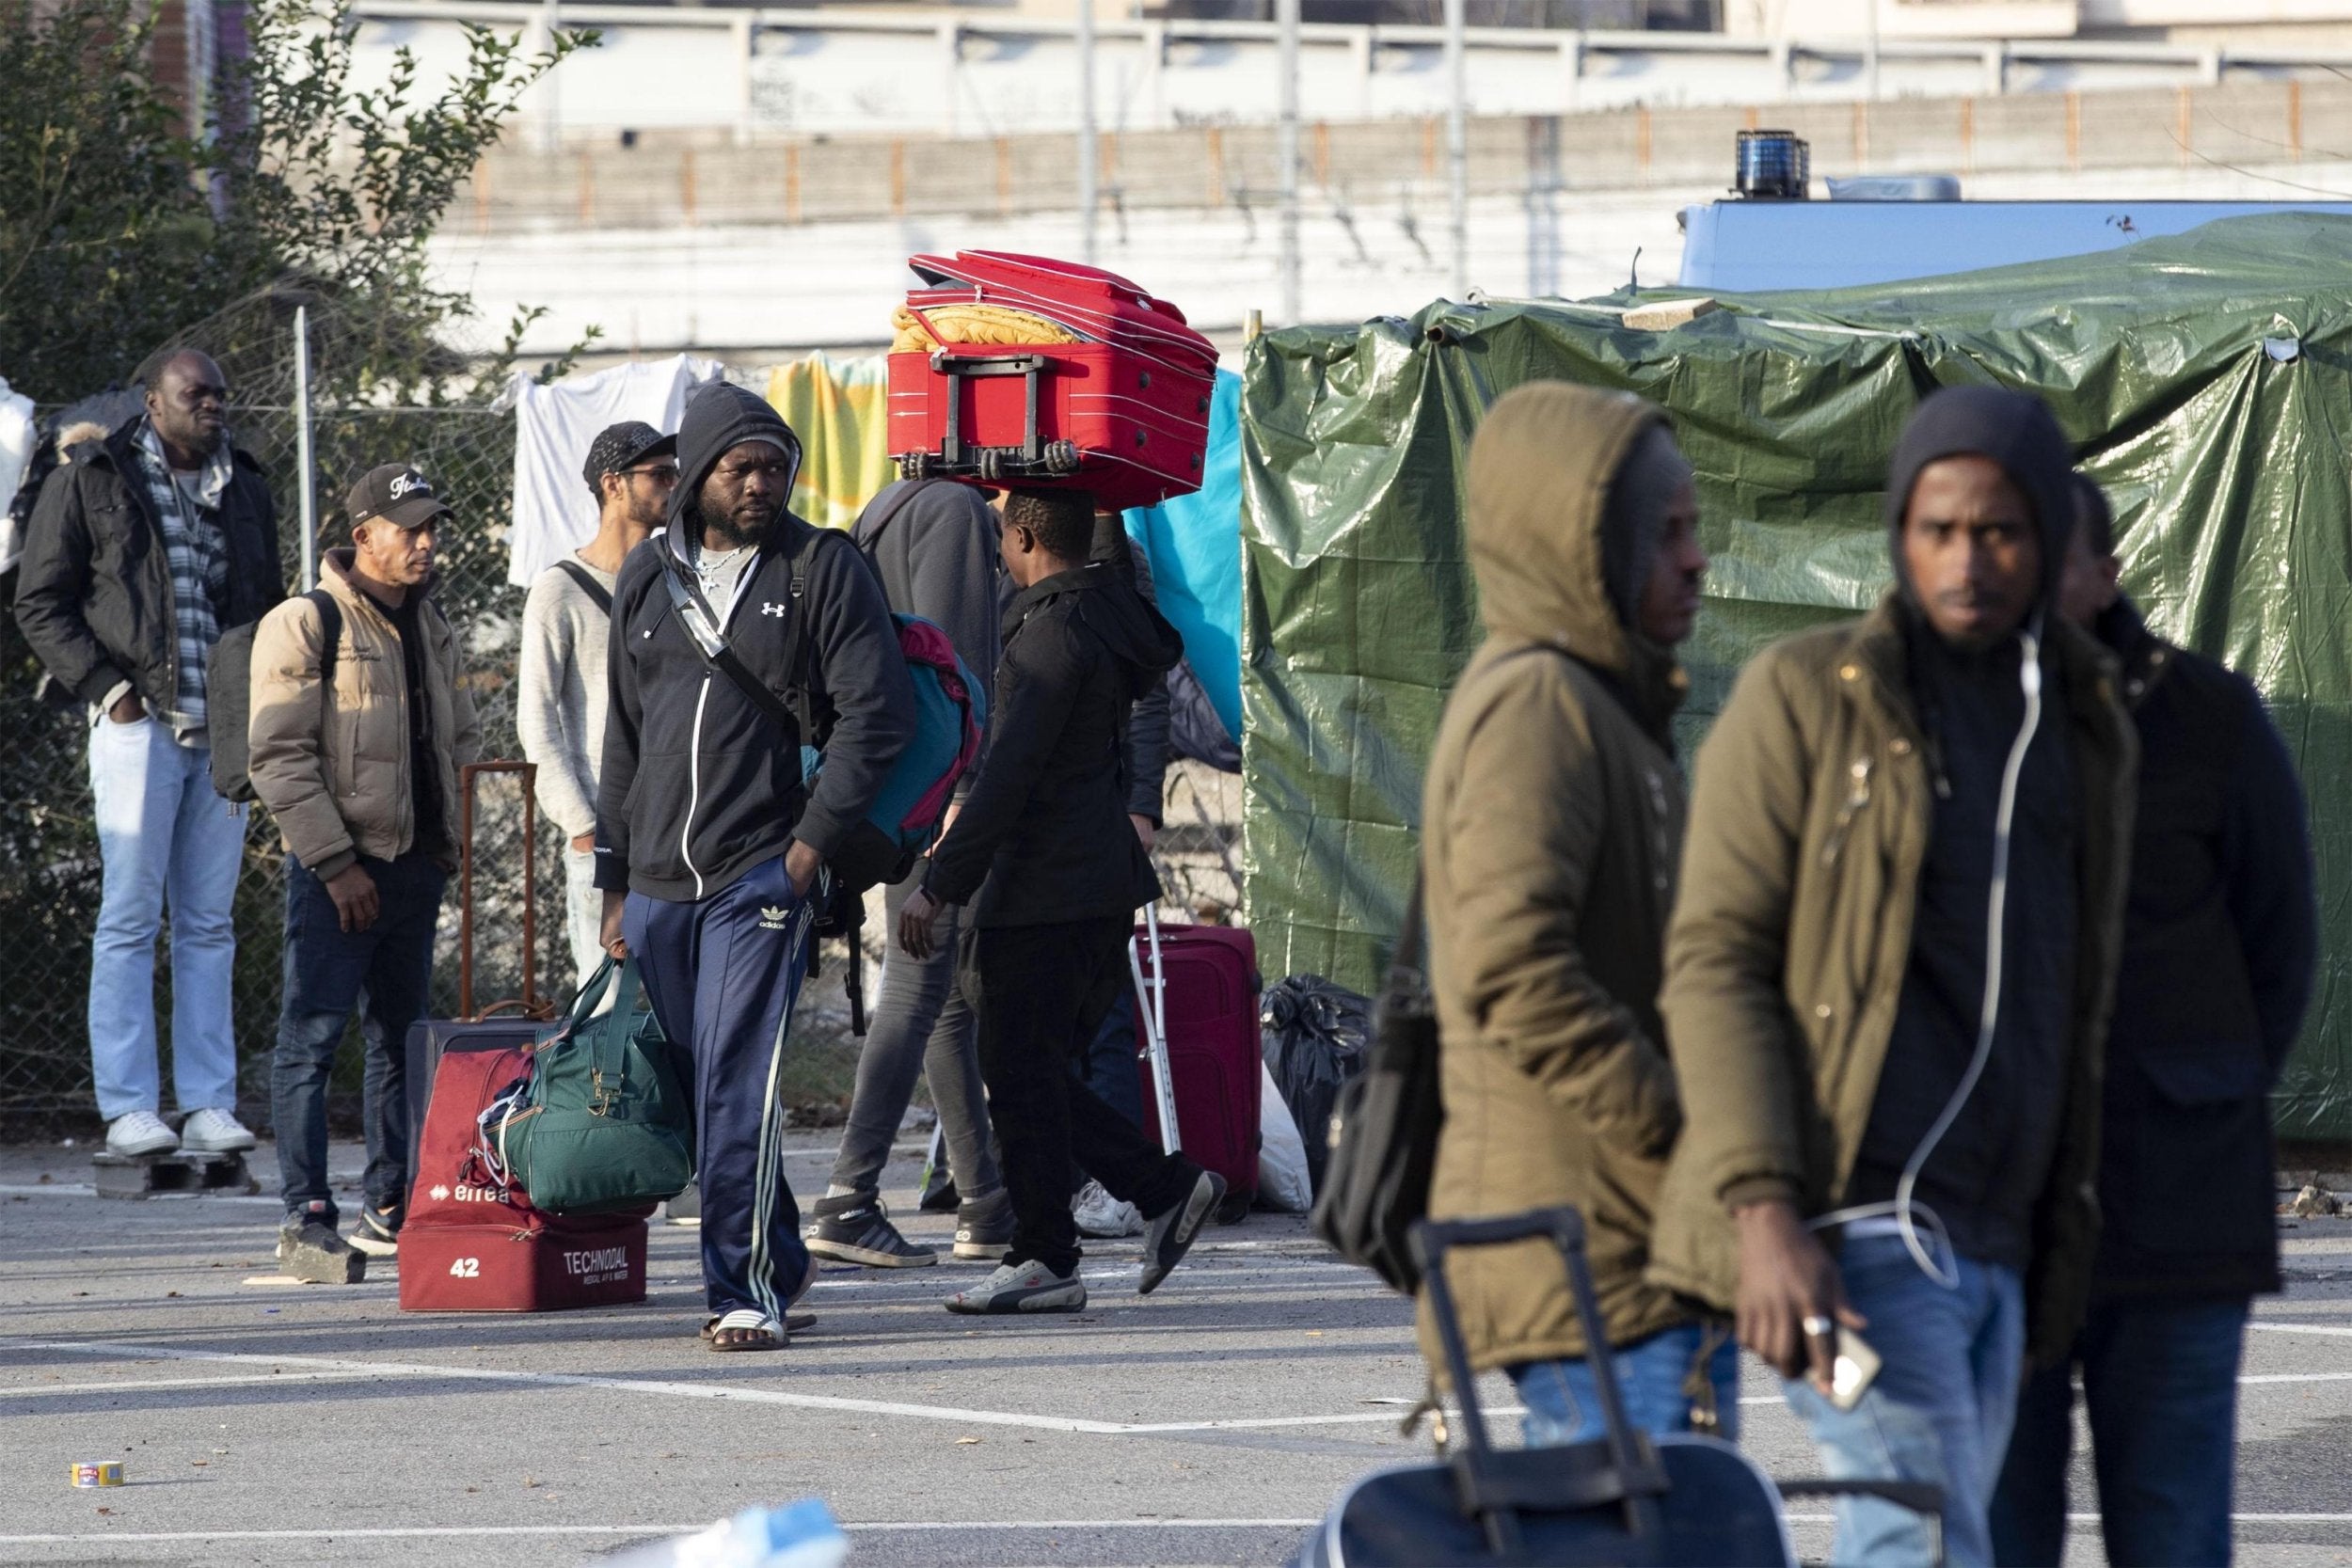 Migrants living rough in Rome